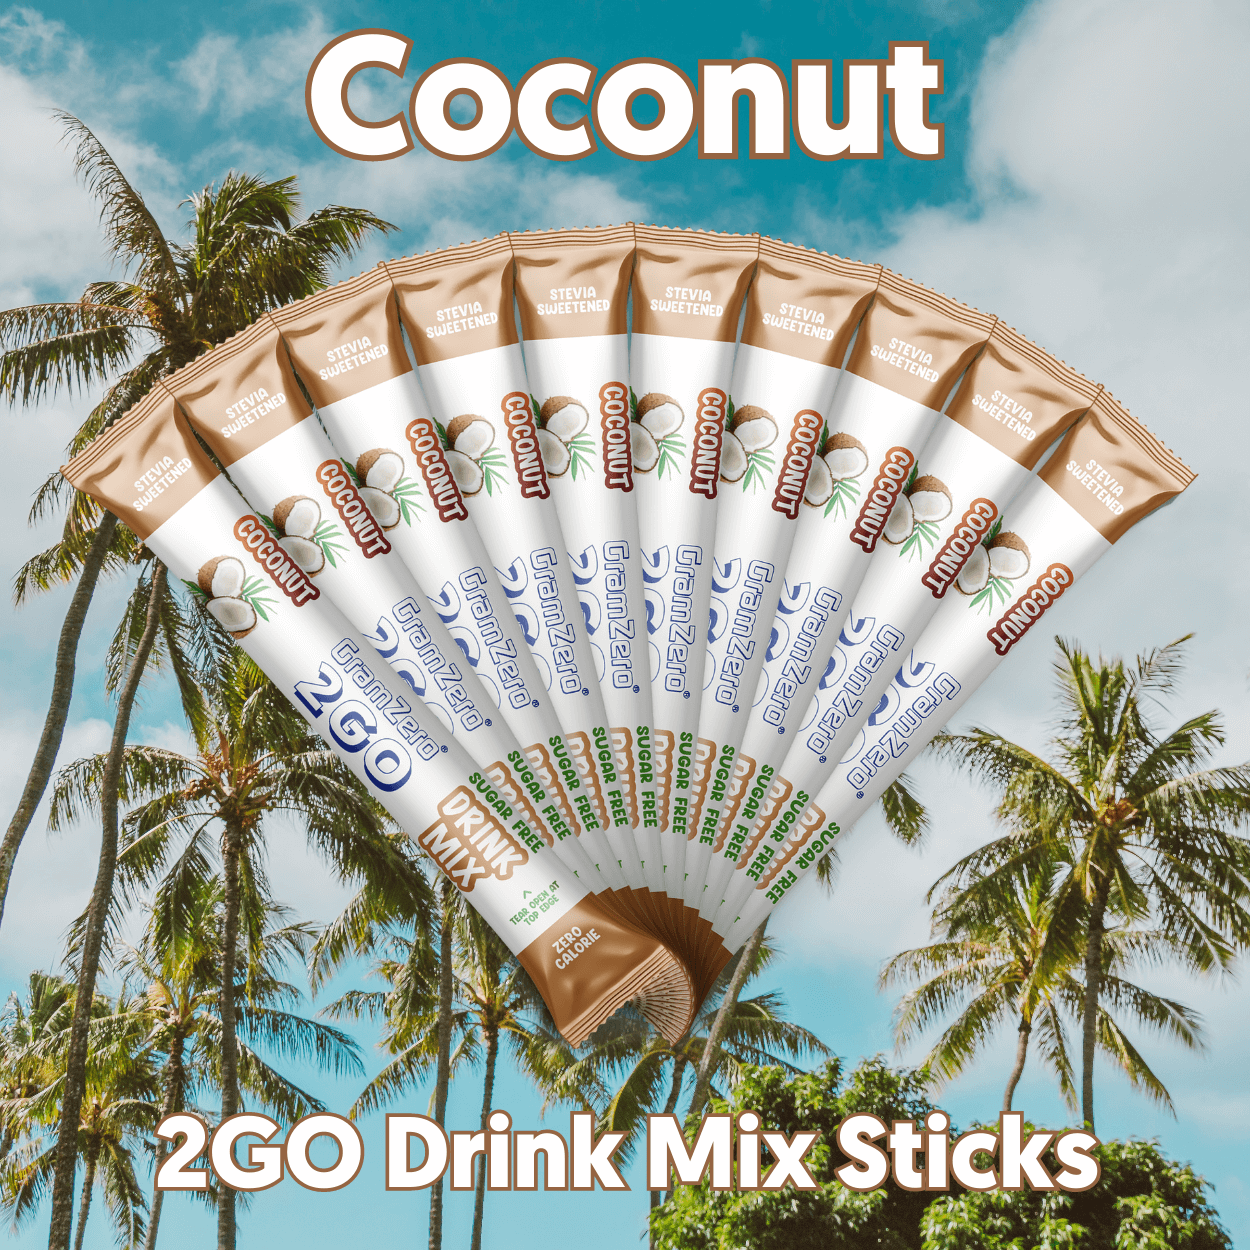 COCONUT 2GO Sugar Free Drink Mix Sticks: 10 Pack ~ Great for Loaded Tea Kits